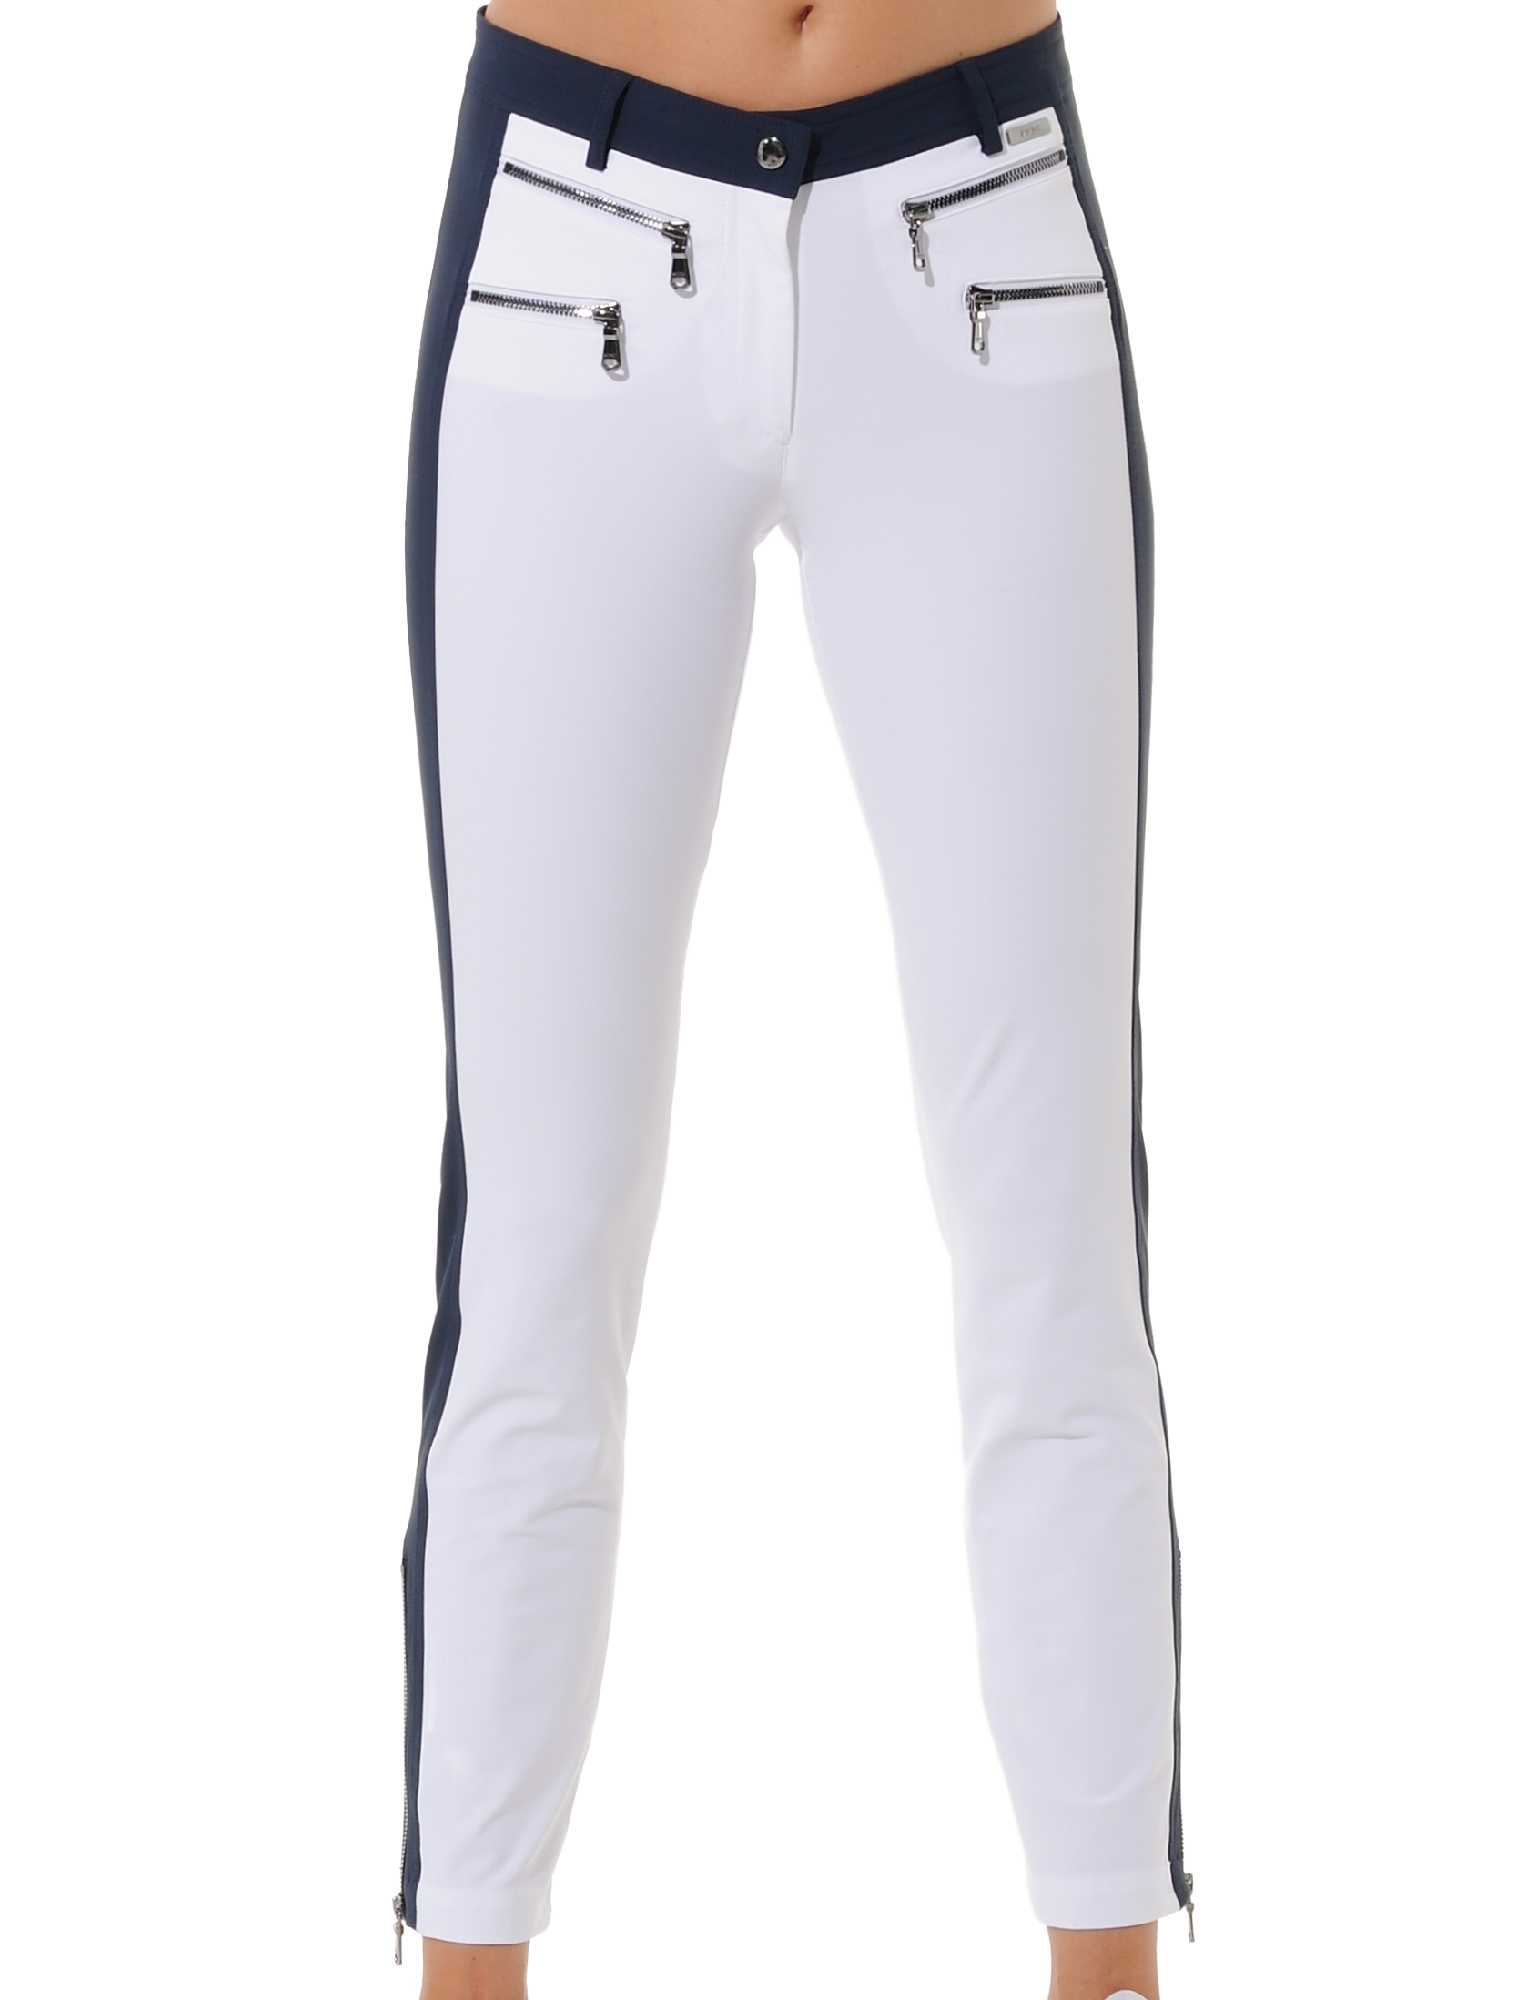 4way Stretch Double Zip Ankle Pants white/navy